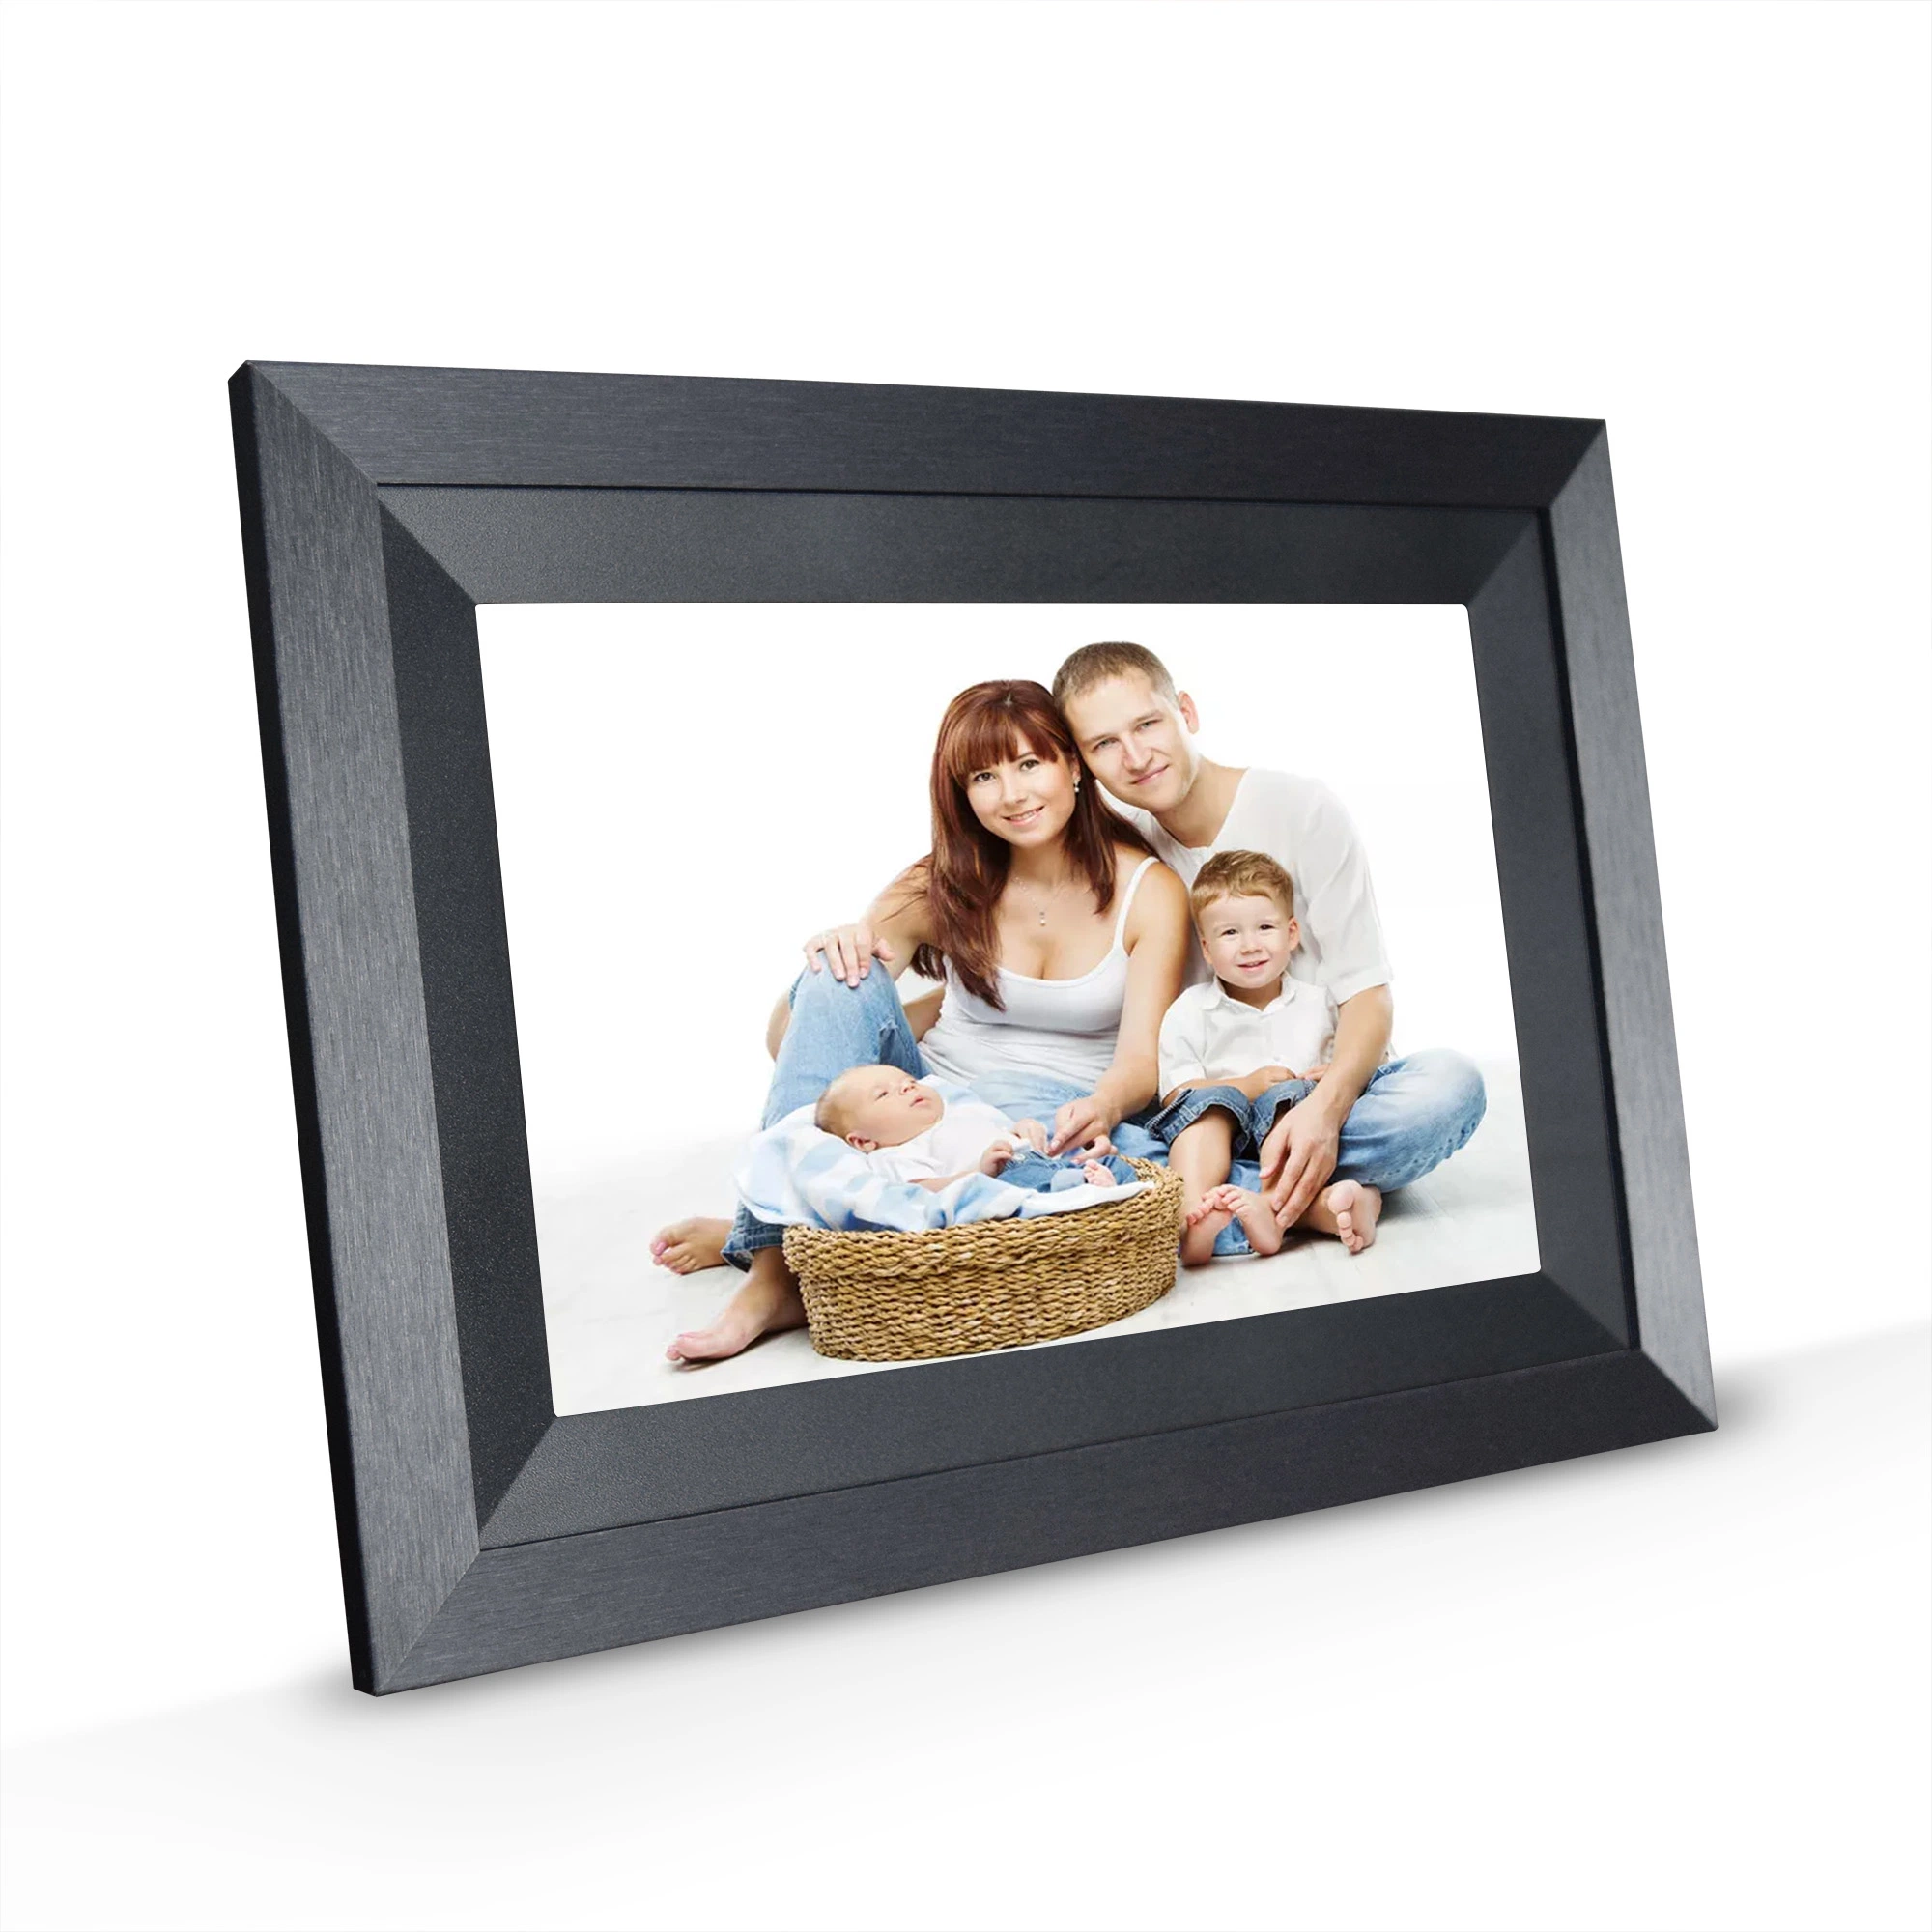 10.1 Inch IPS LCD Advertising Screen Digital Photo Frame HDMI-in Available